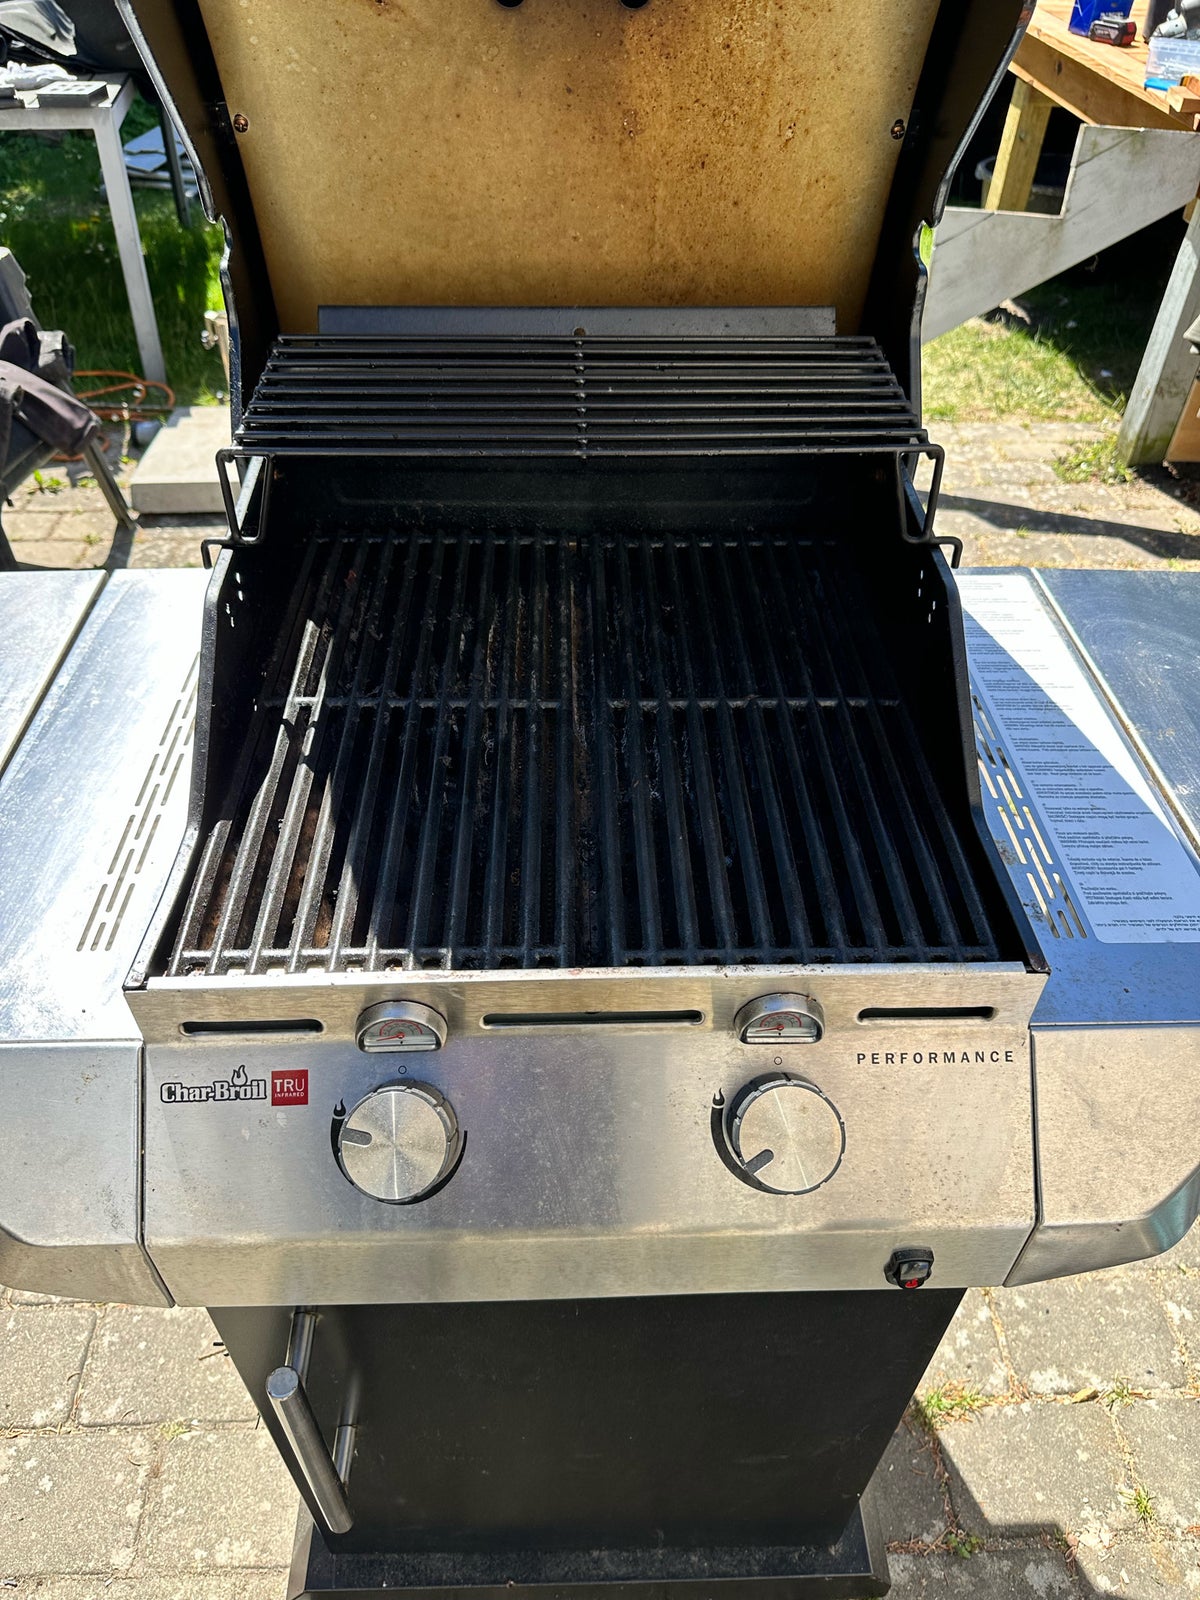 Gasgrill, Chat-broil